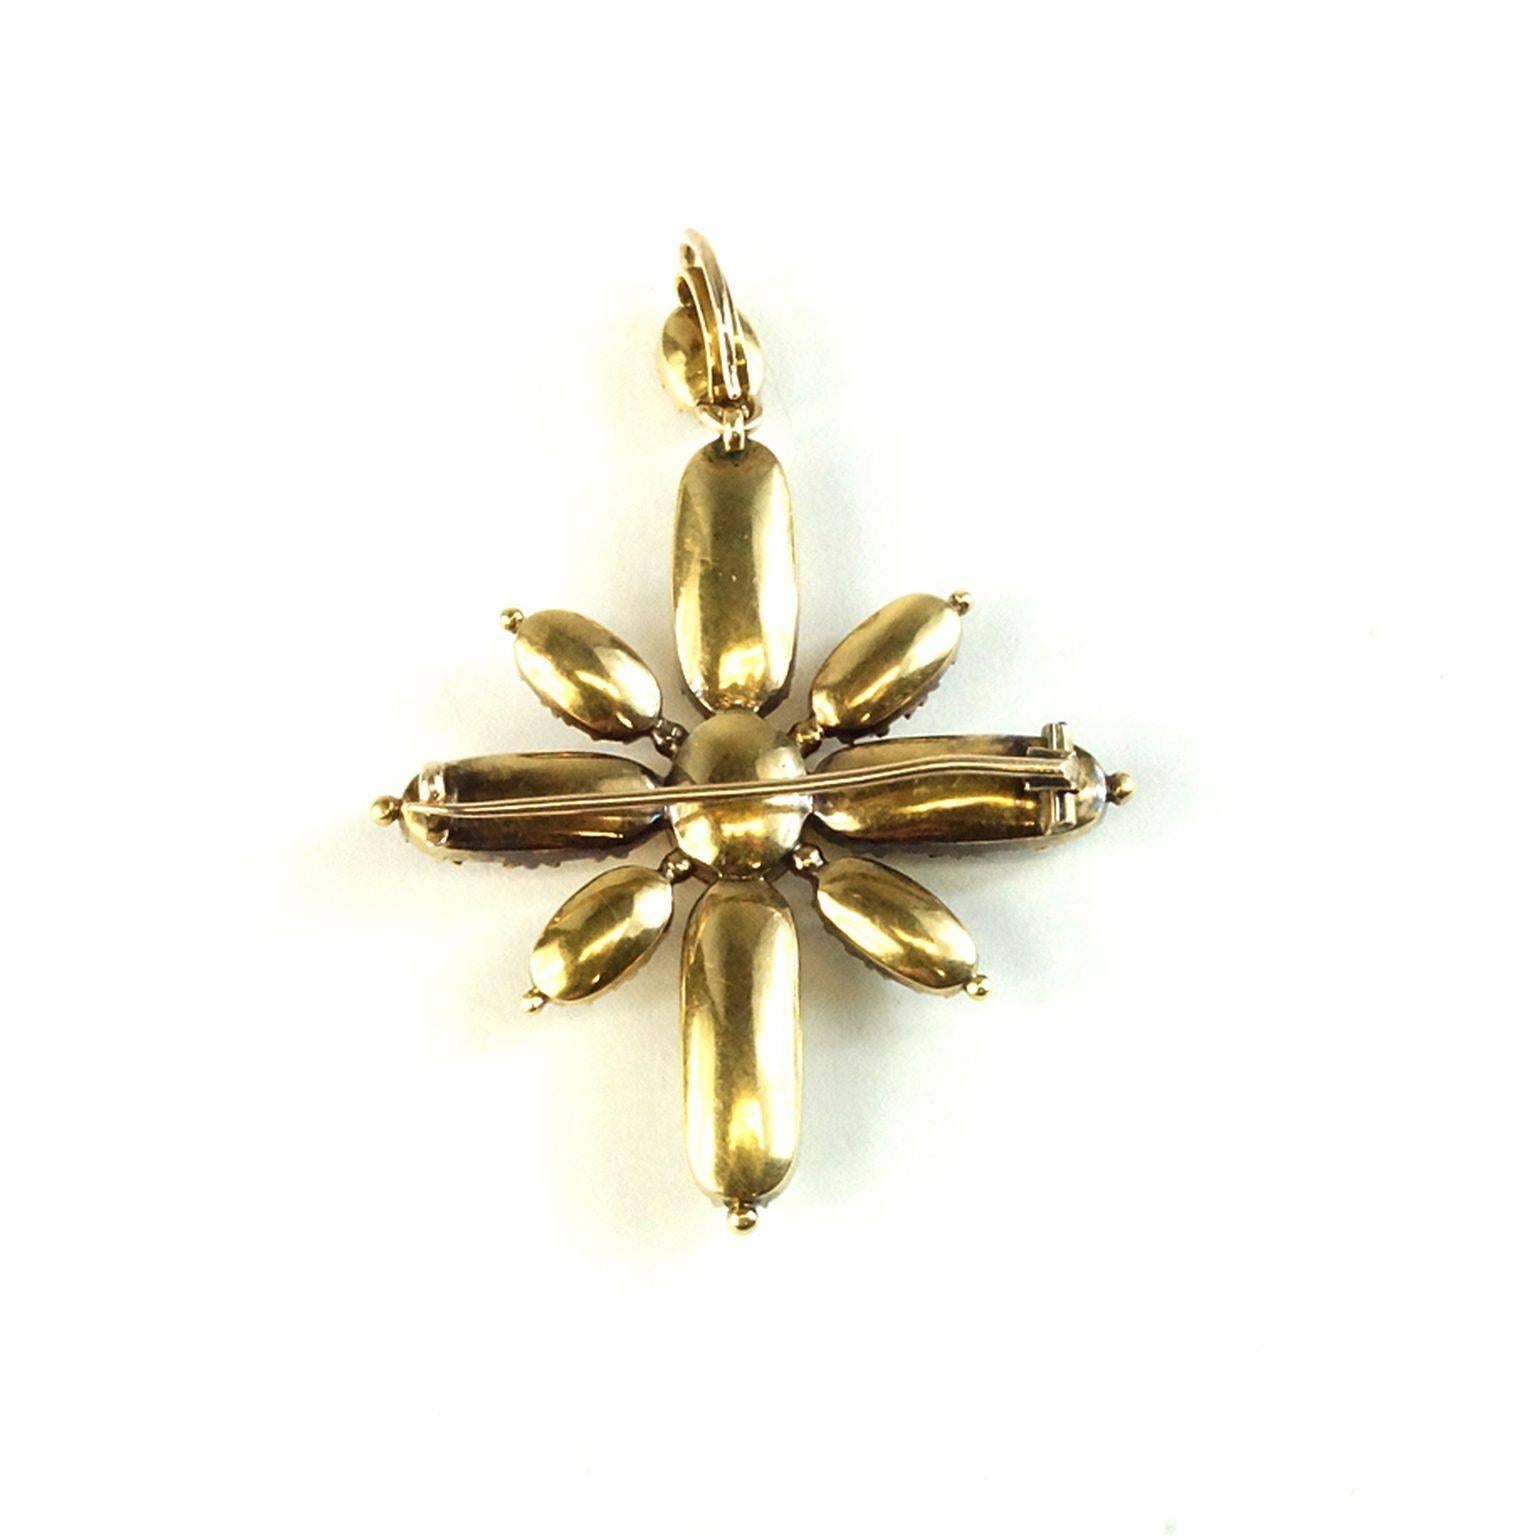 Beautiful imperial topaz flower cross!!!! Circa 1890 French 15kt yellow gold, solid backed, elongated cut stones. The cross measures 2 inches in length and 1.5 inches wide.  The cross comes in its original box.



